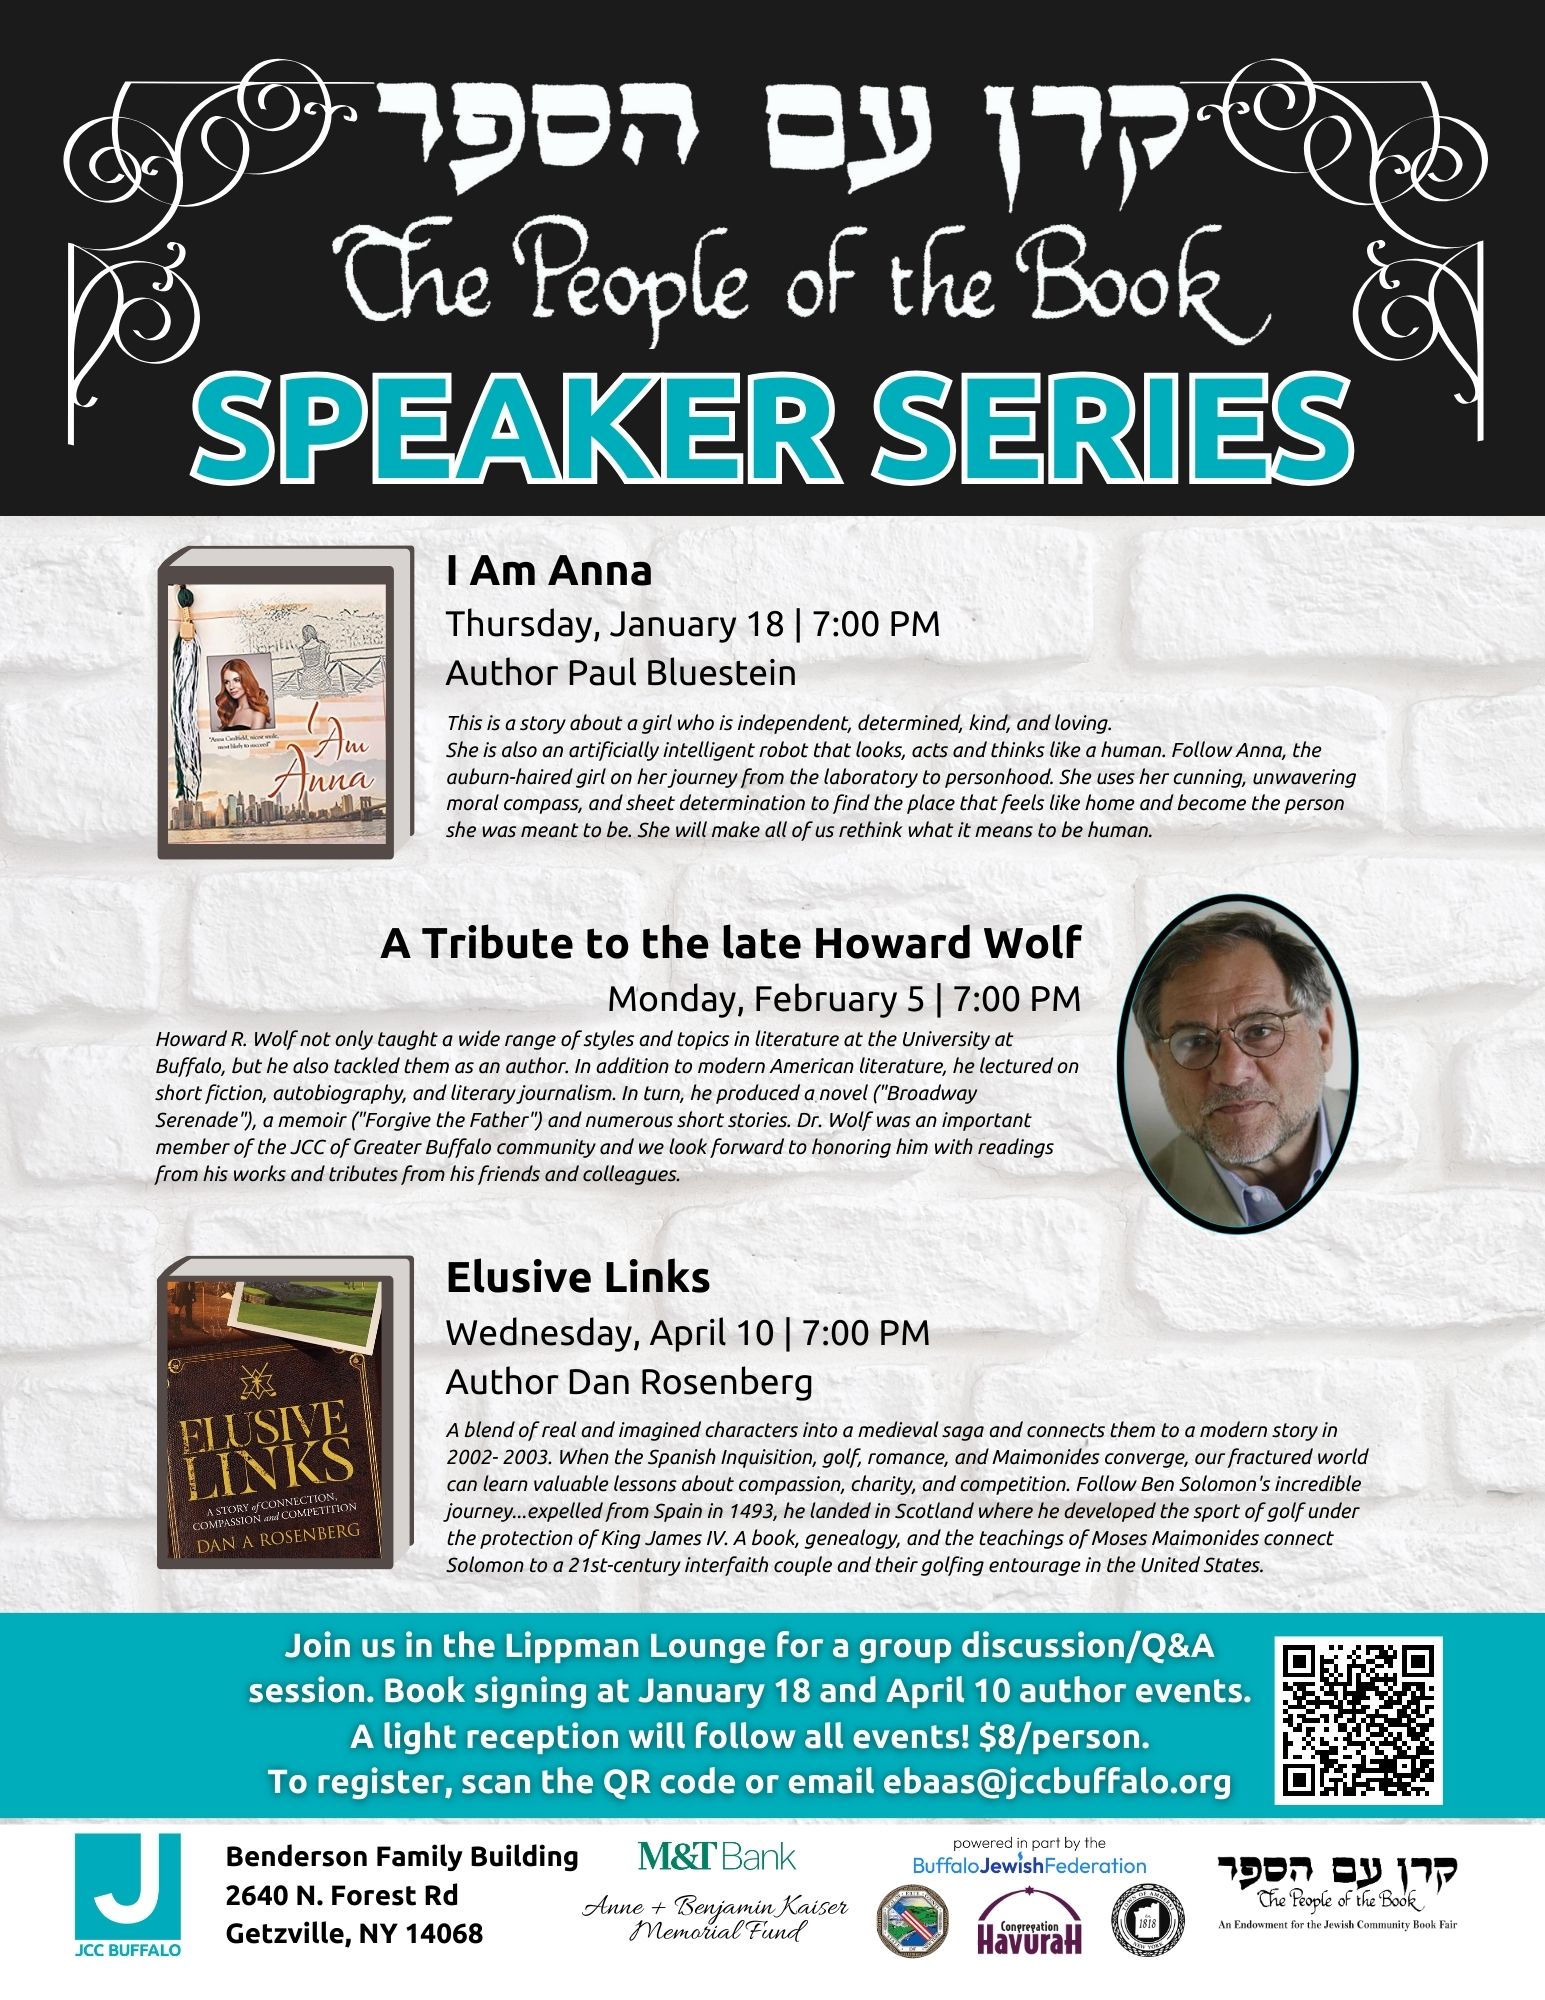 People of the Book Spring Series: Author Paul Bluestein - People of the Book Flyer 2